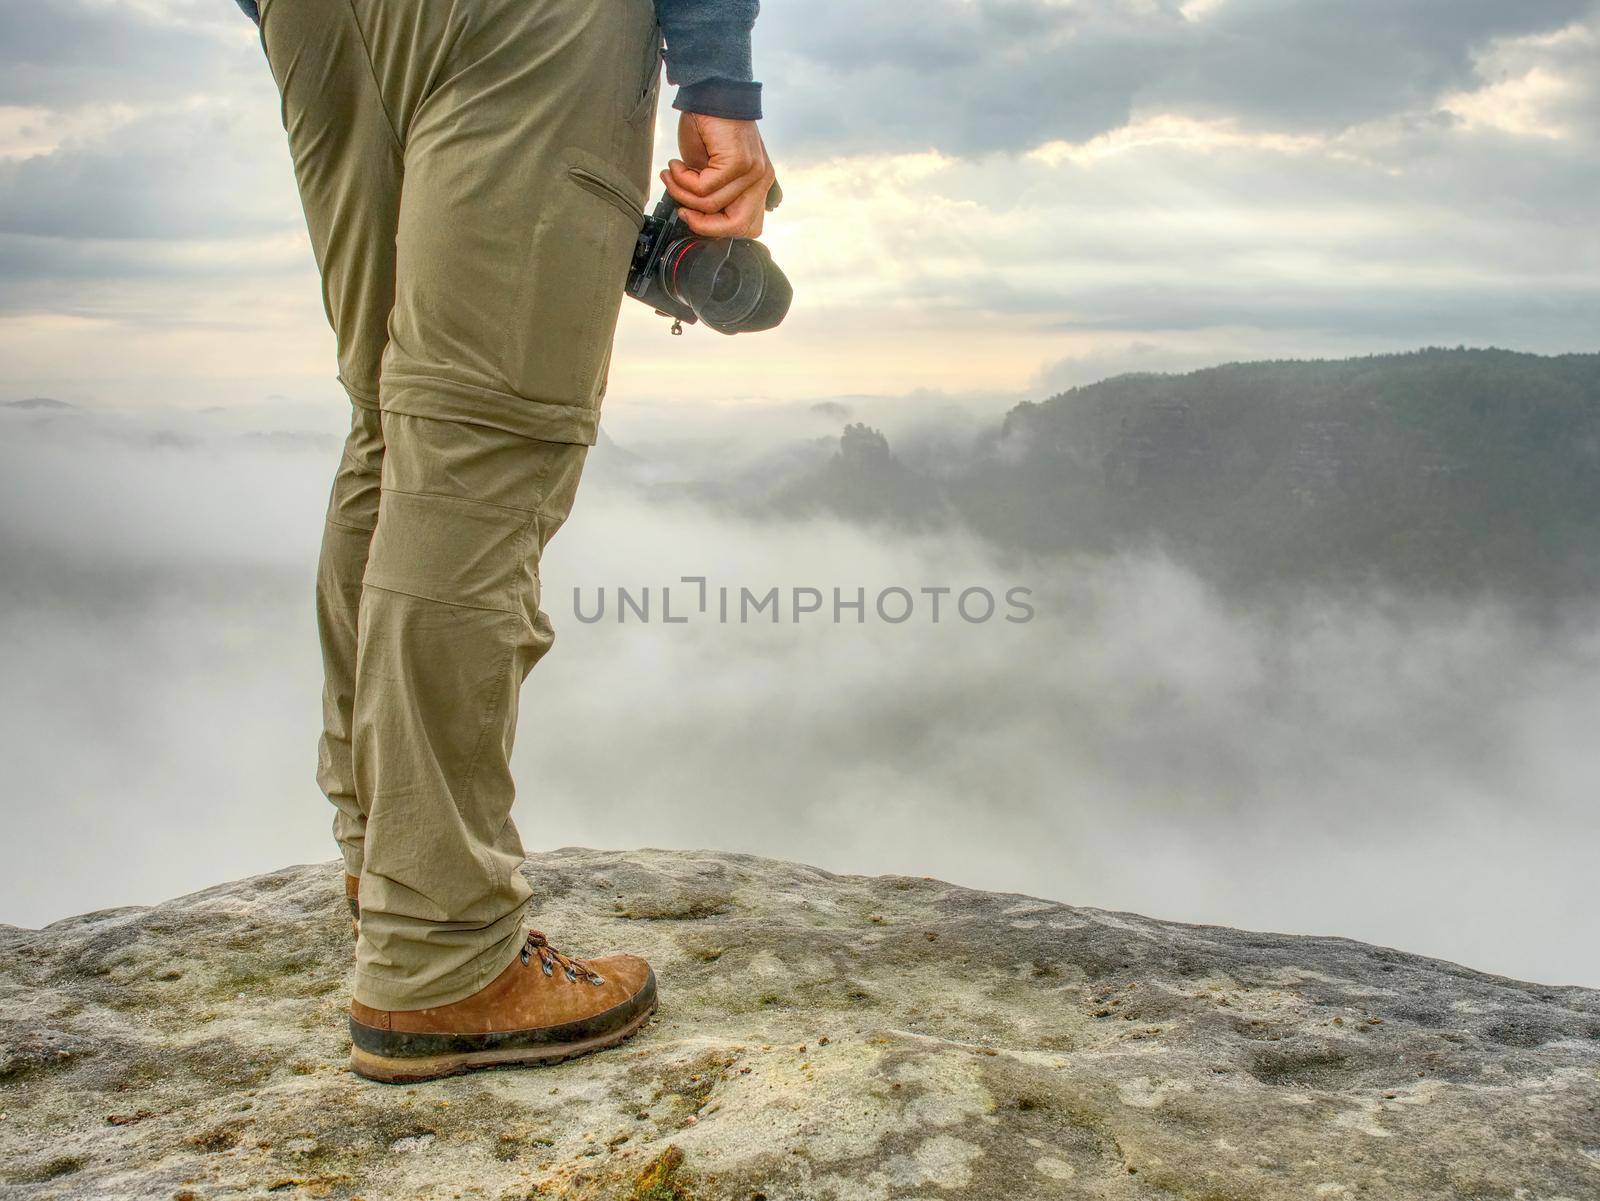 Landscape photograper with camera ready in hand. Man climbed up on exposed rock for fall photos with his digital camera. Cliff above misty autumn landscape.